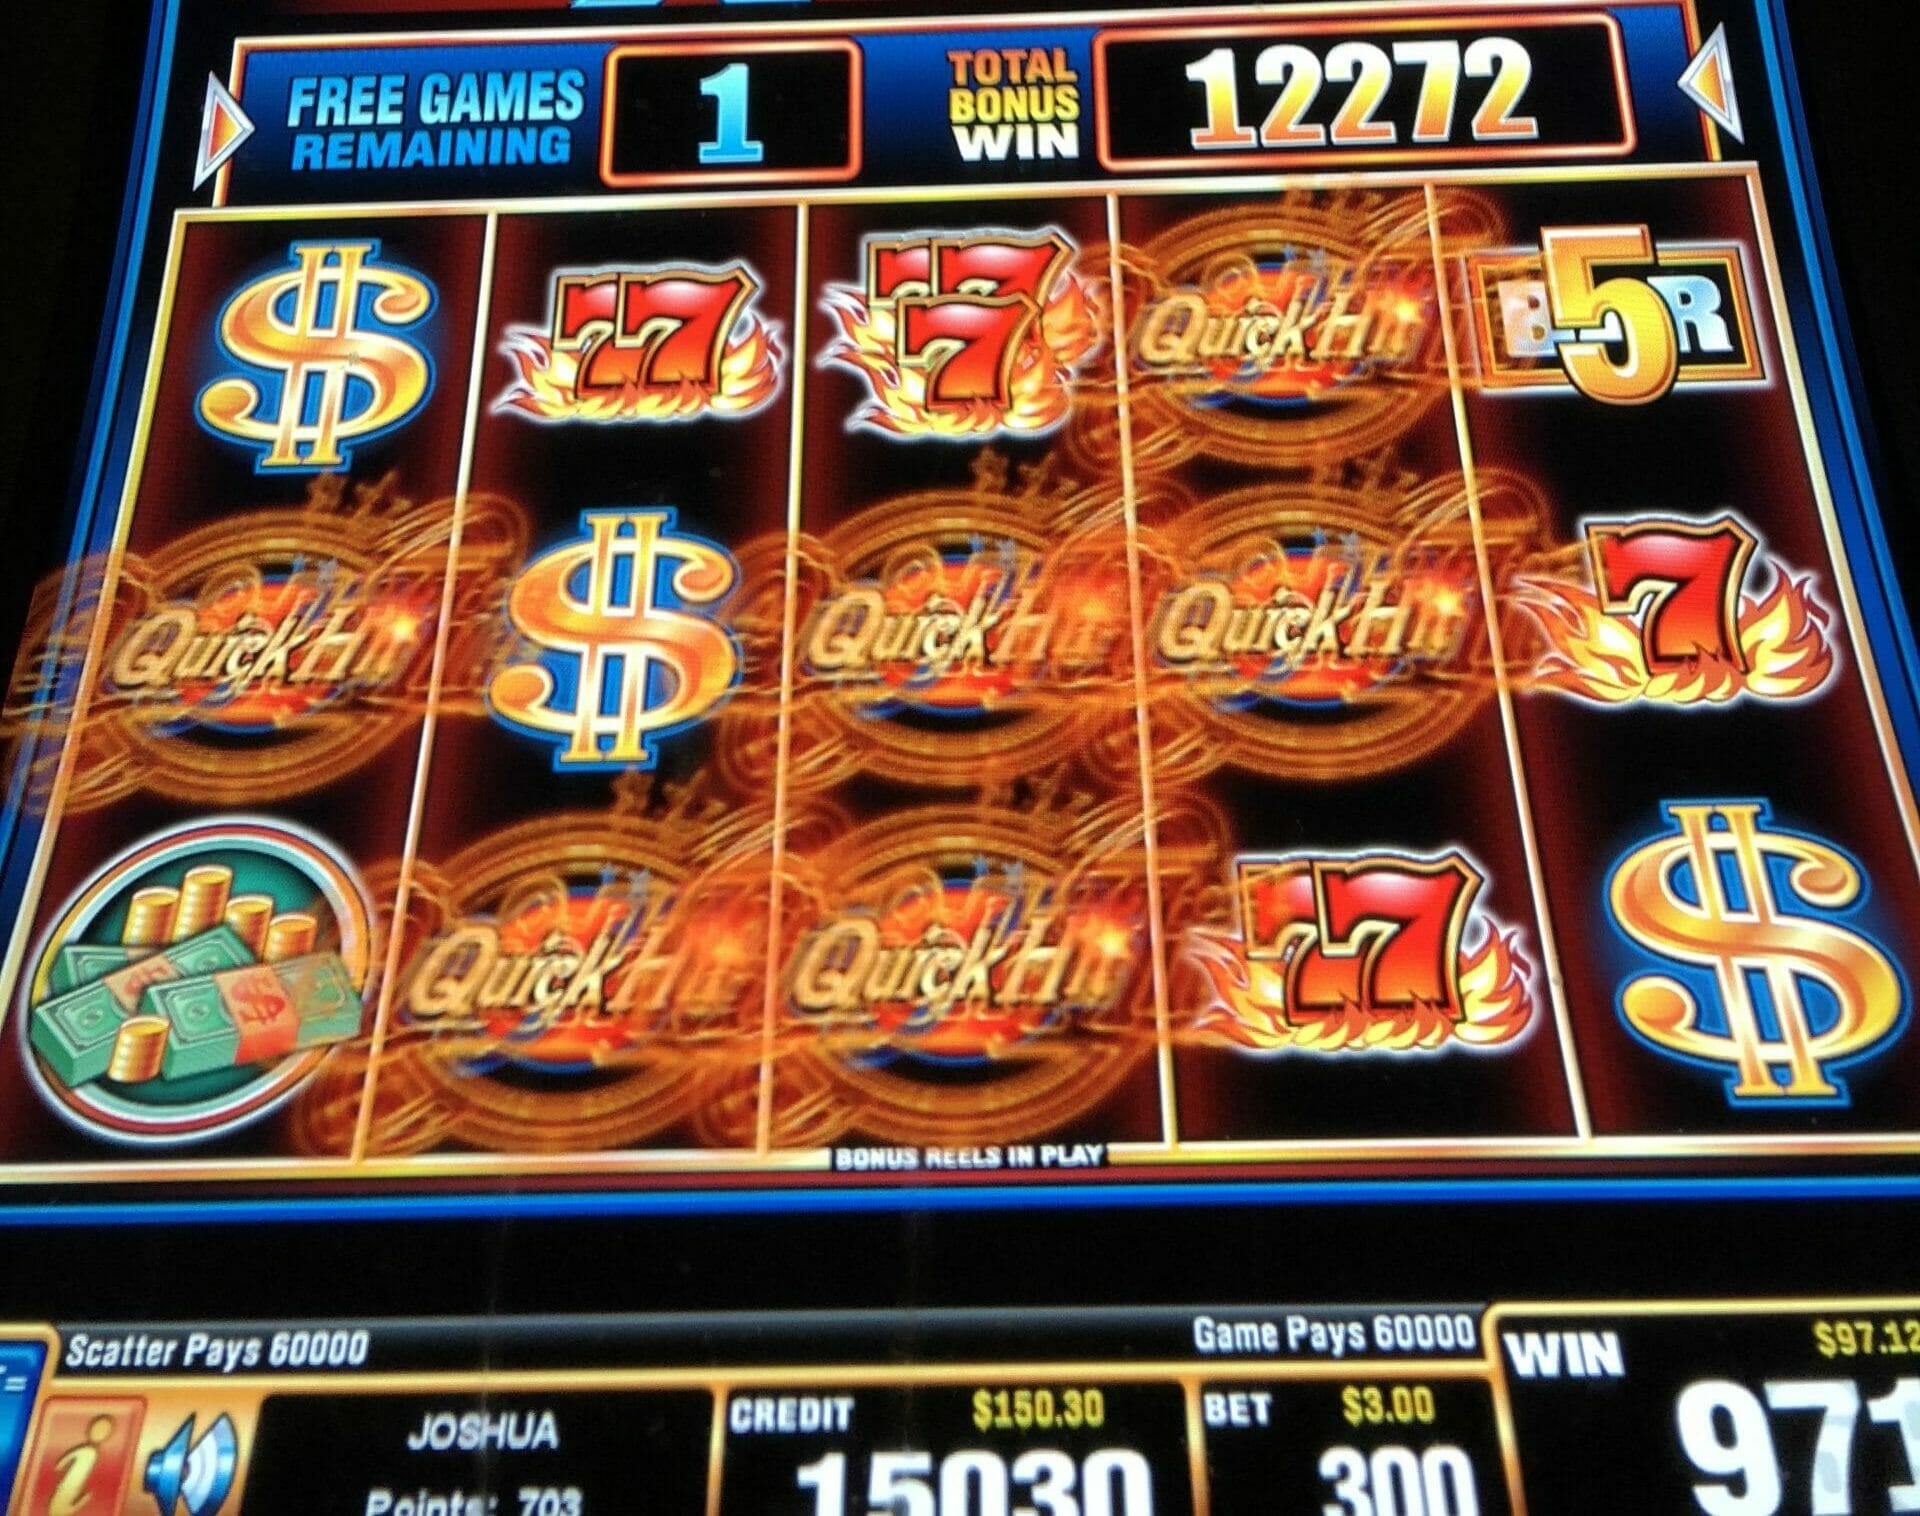 Free Slot Machine Games Online Without Registration - Pama Slot